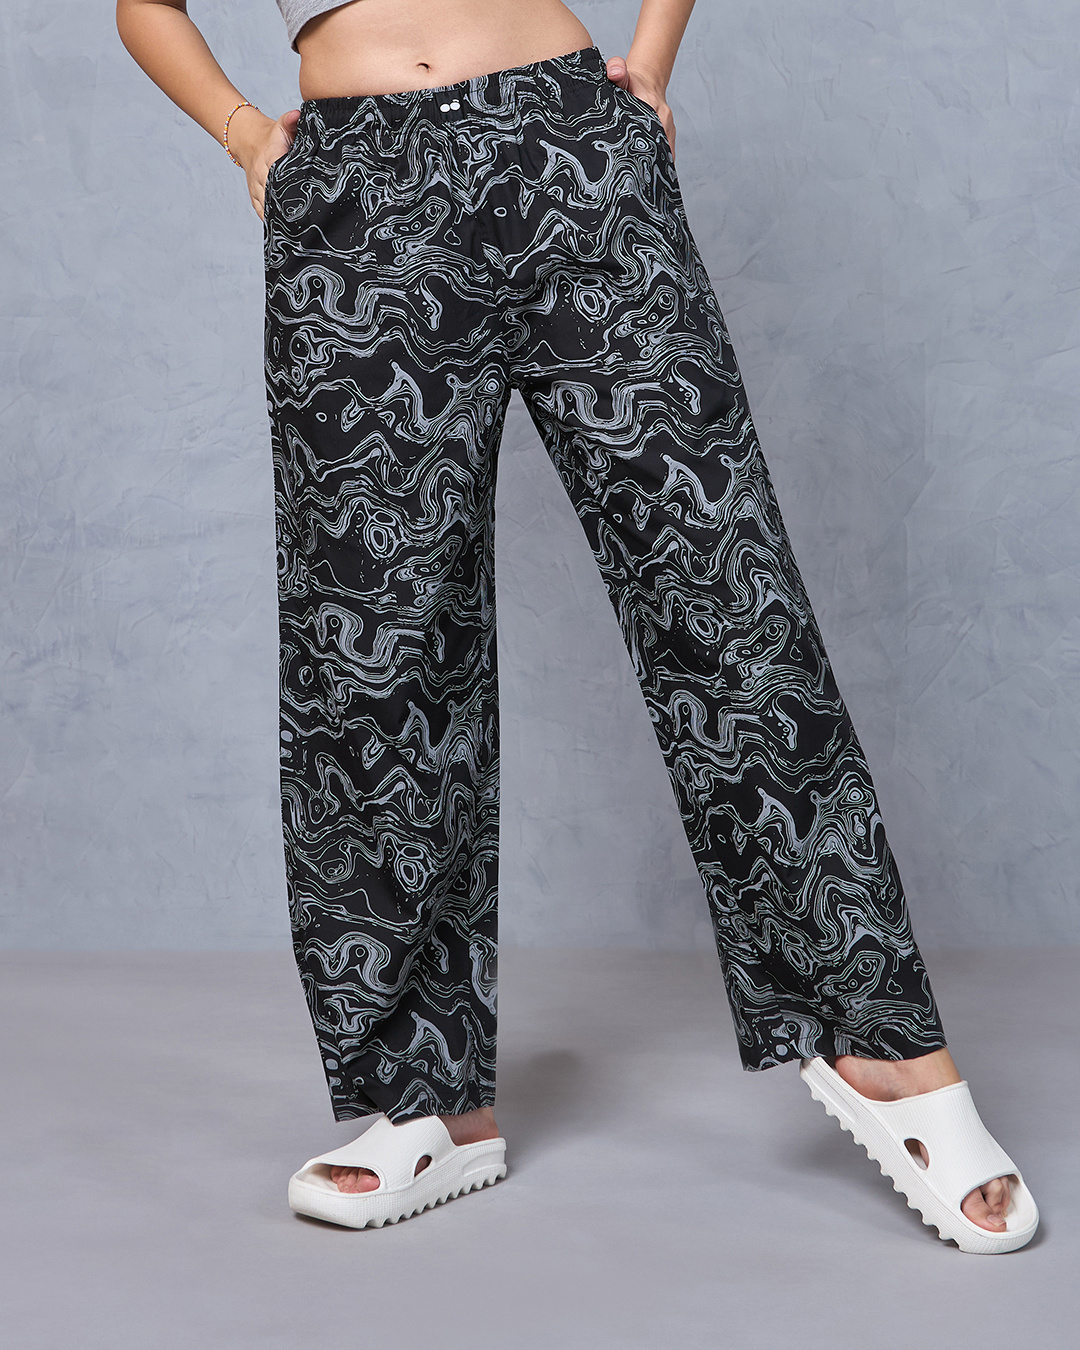 Buy Women's Black All Over Printed Oversized Pyjamas Online in India at ...